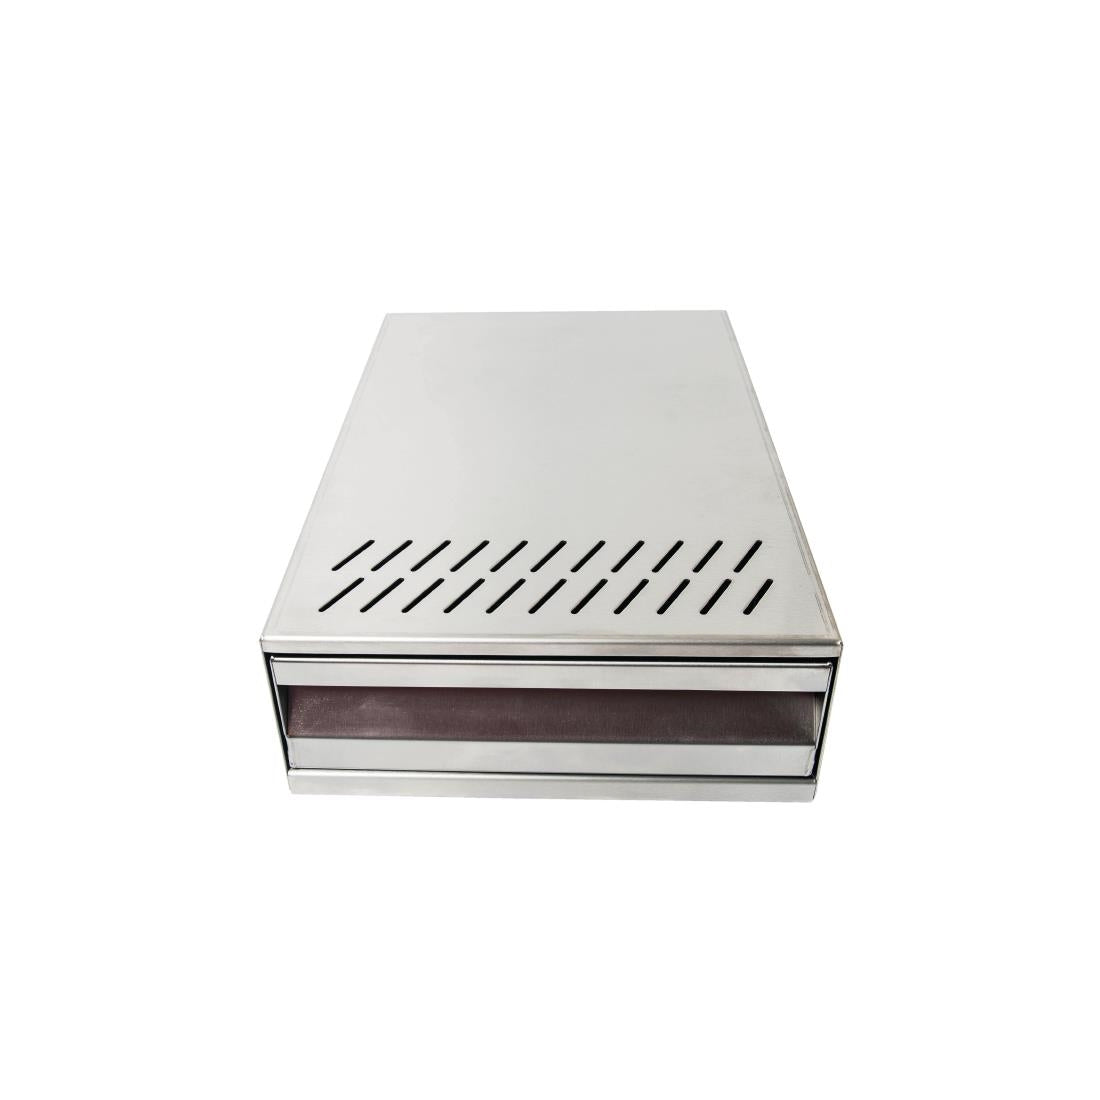 HC559 Premium Stainless Steel Knock Out Box